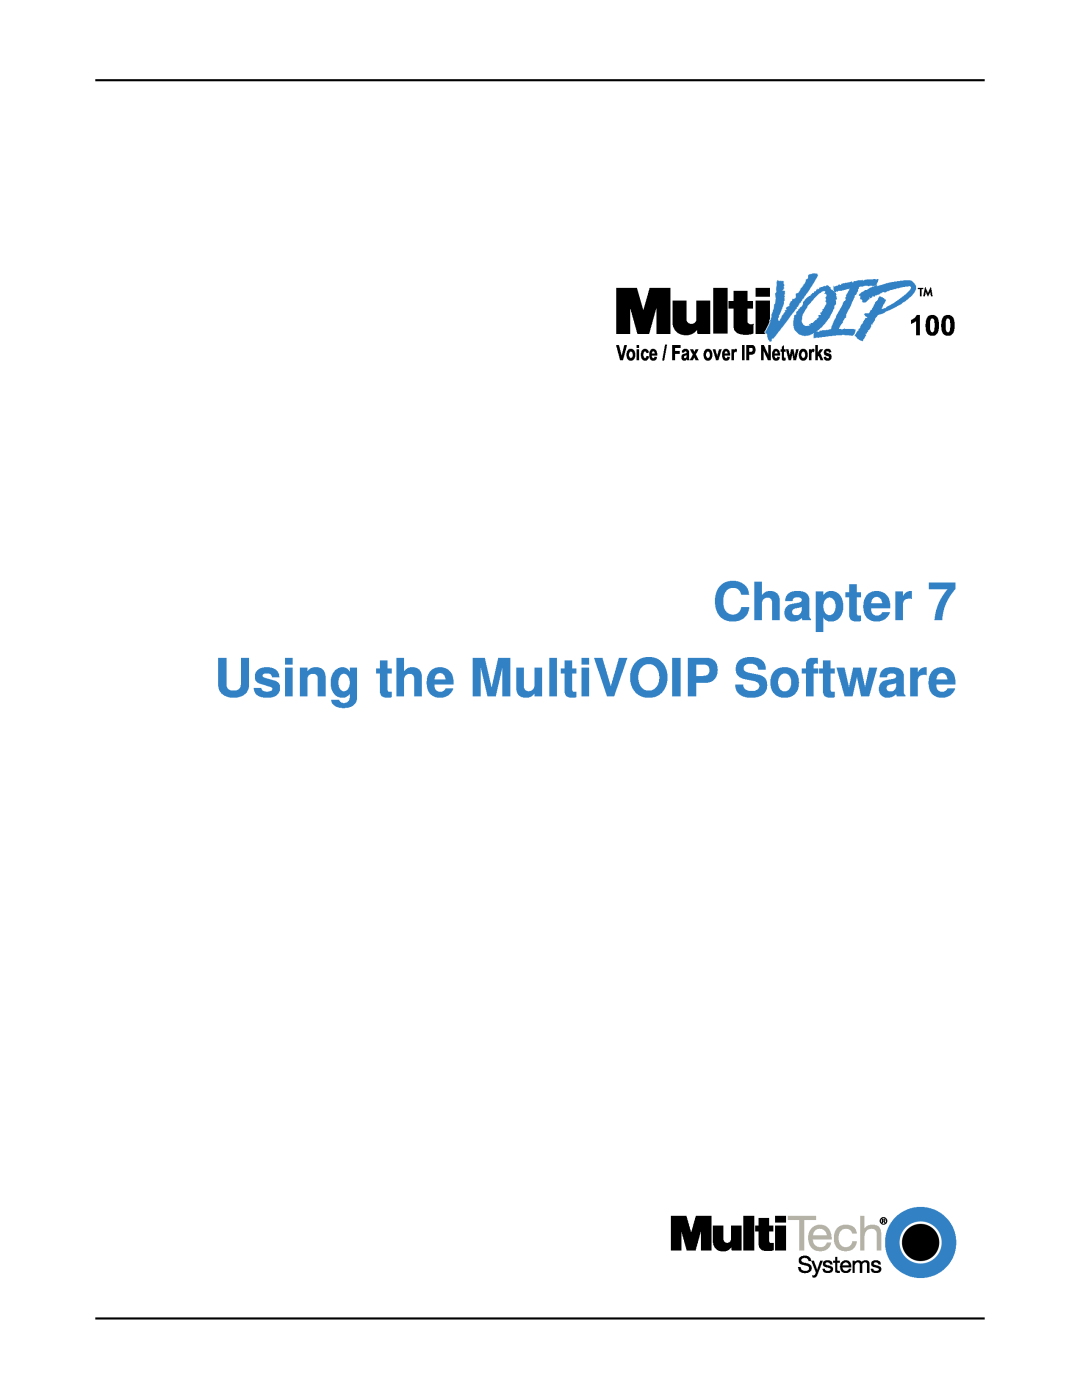 Multi-Tech Systems MVP120 manual Chapter Using the MultiVOIP Software, Voice / Fax over IP Networks 